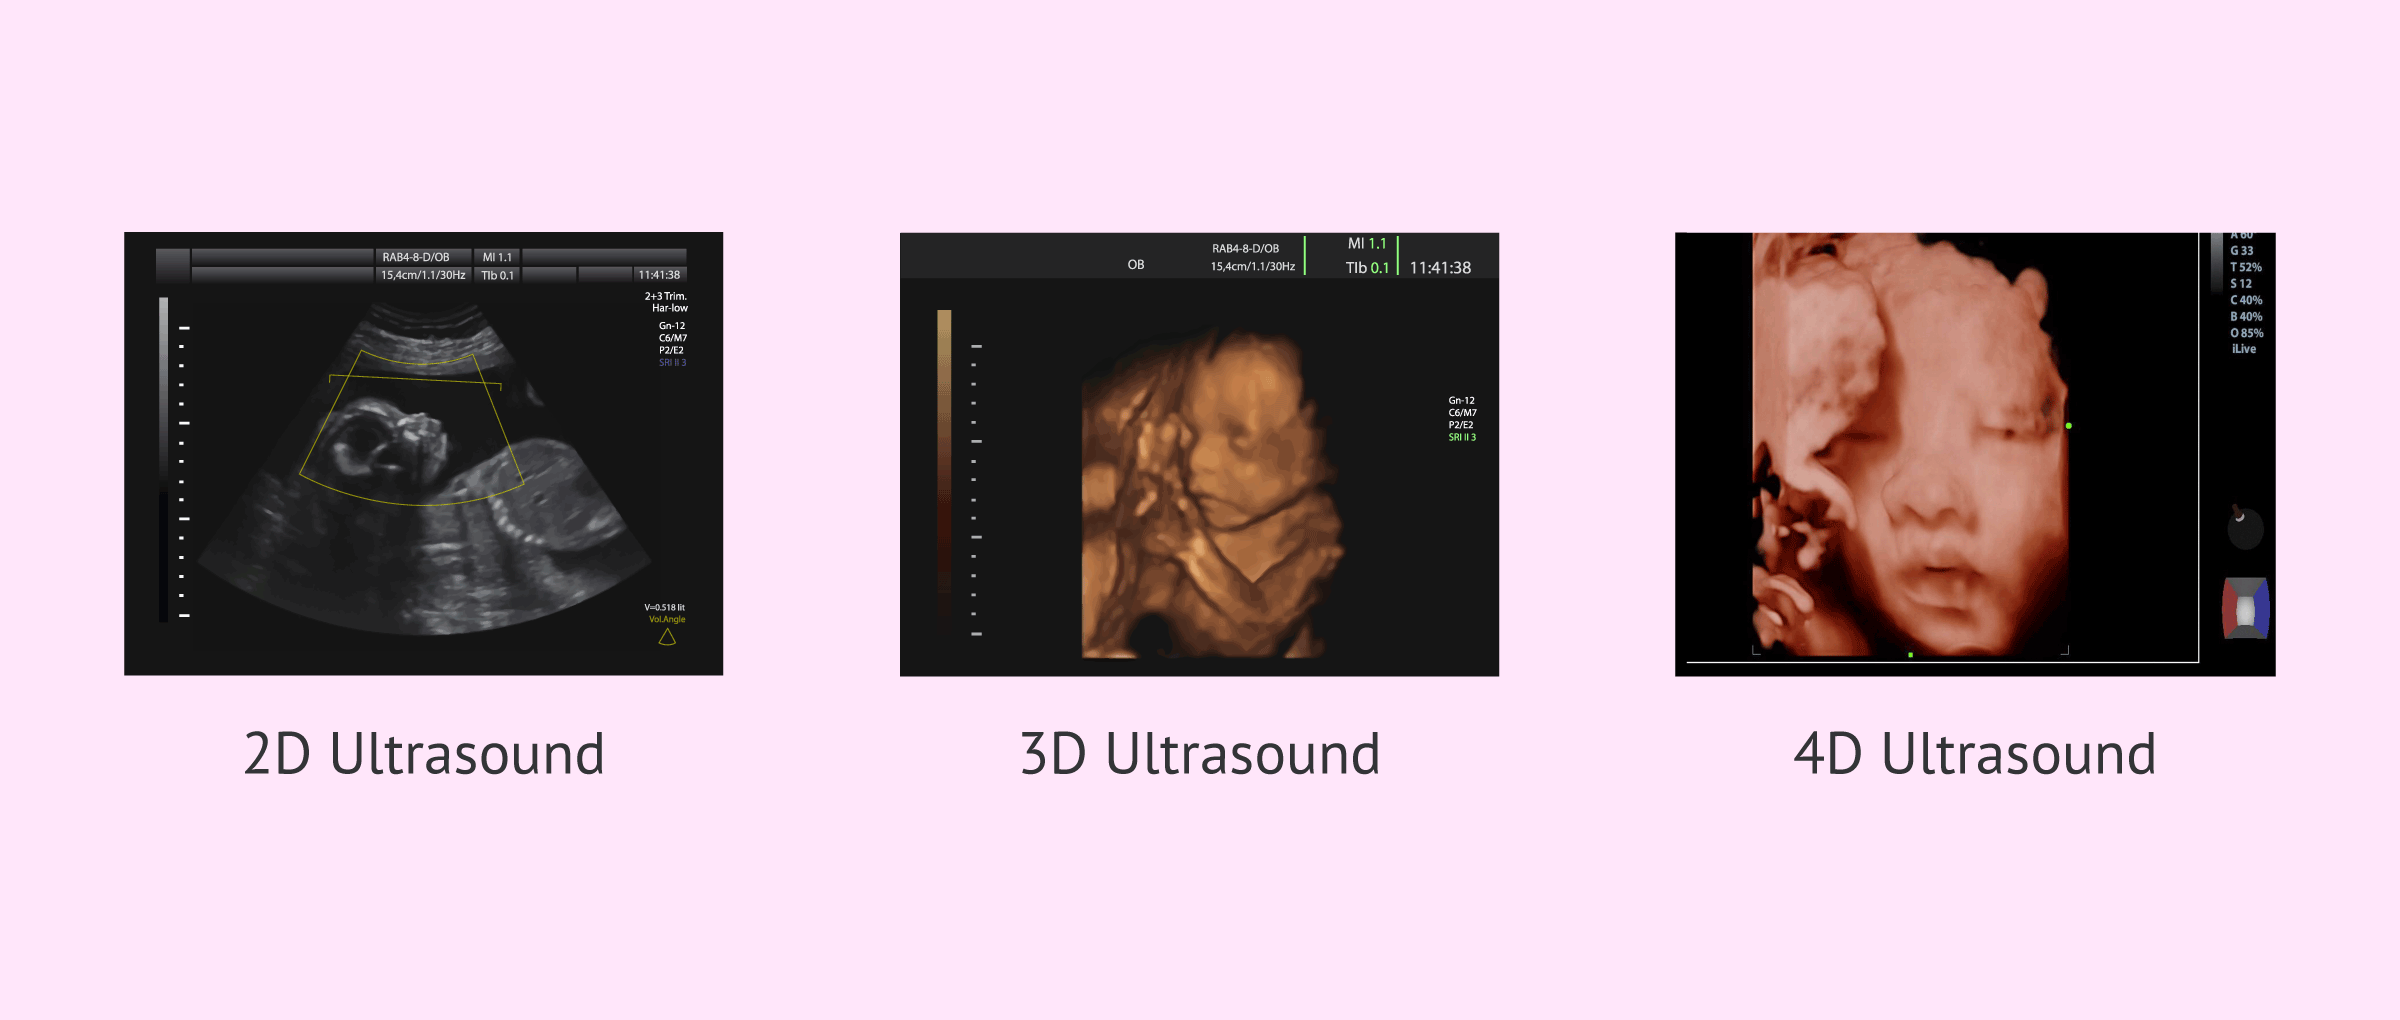 Differences in imaging between 2D, 3D and 4D ultrasound